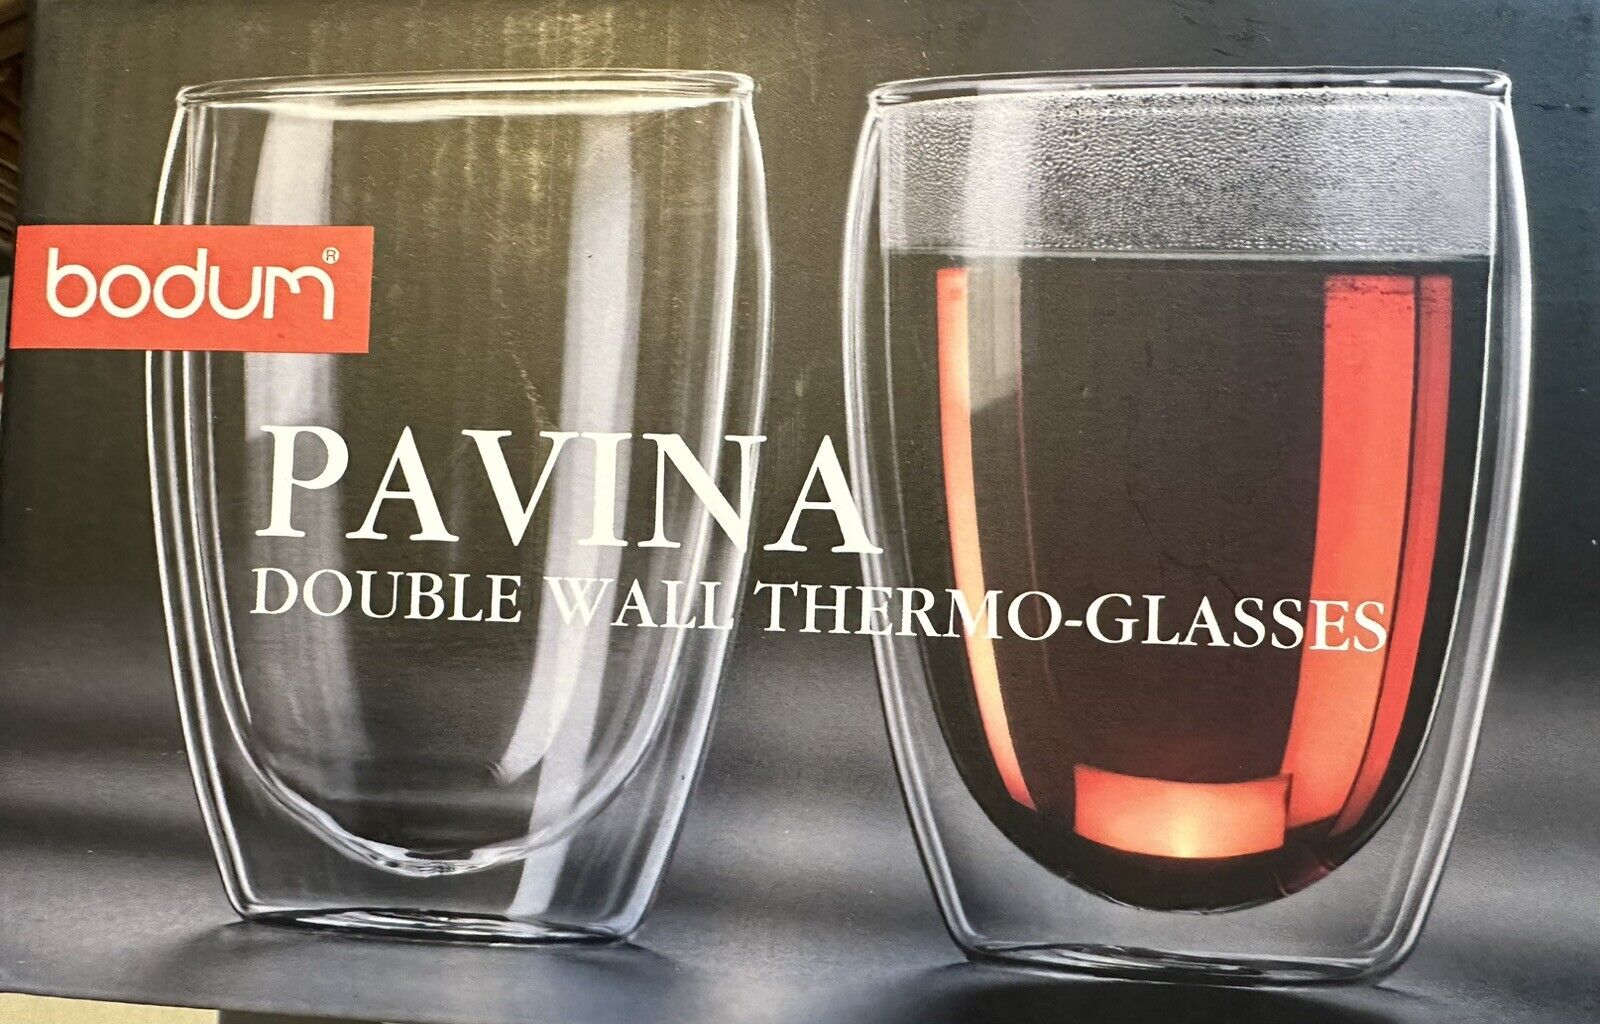 Set of 2 Bodum Pavina Double Wall Thermo Glasses 12 Oz Clear - Brand New